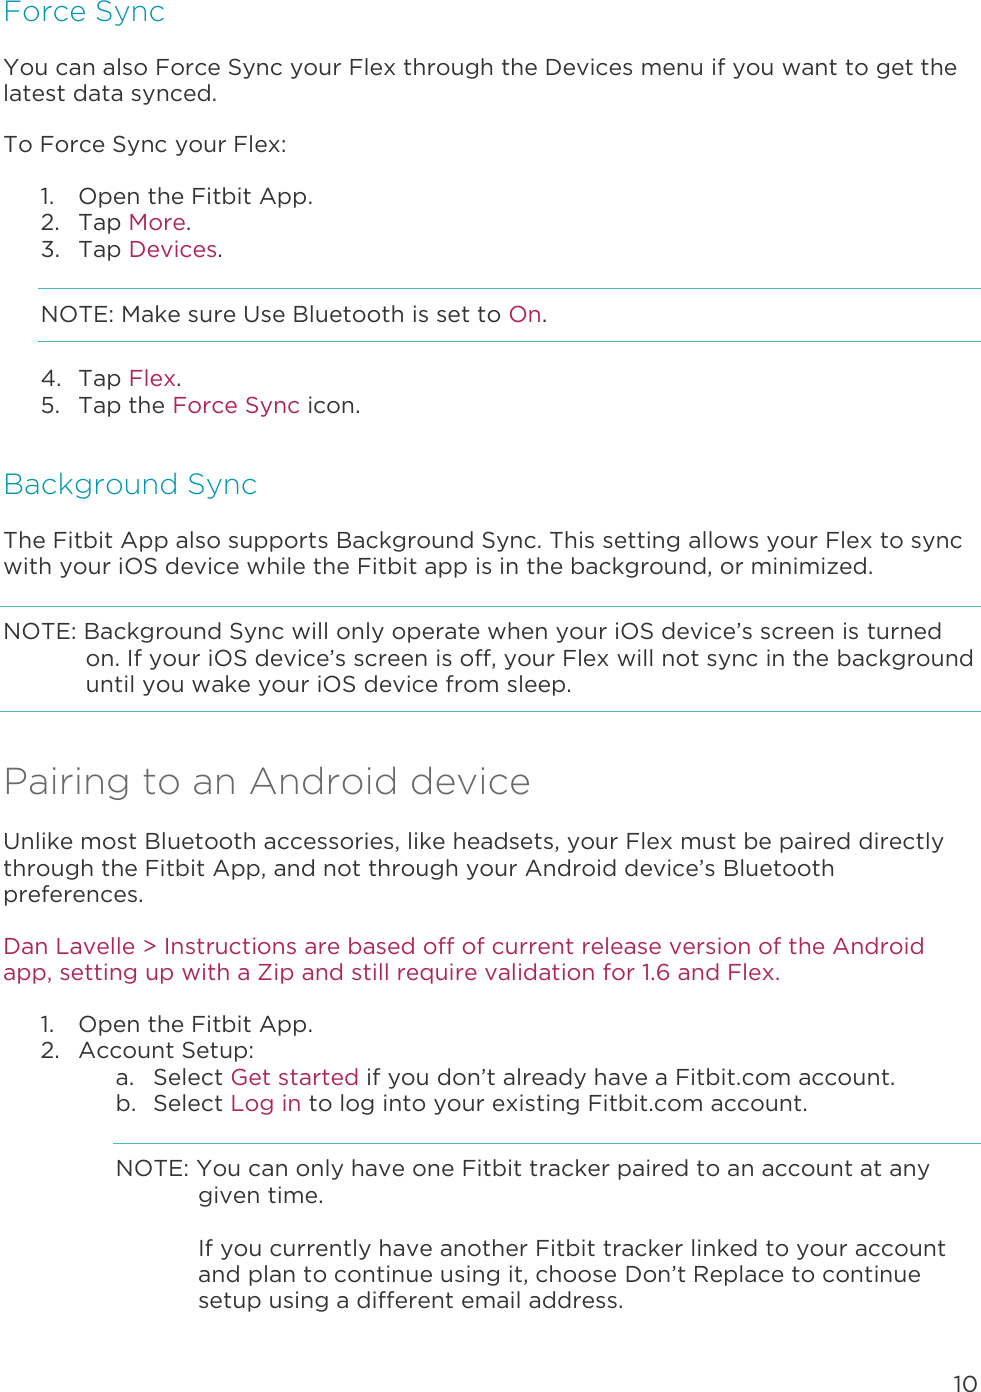 10  Force Sync You can also Force Sync your Flex through the Devices menu if you want to get the latest data synced.  To Force Sync your Flex:  1. Open the Fitbit App.  2. Tap More. 3. Tap Devices. NOTE: Make sure Use Bluetooth is set to On. 4. Tap Flex. 5. Tap the Force Sync icon. Background Sync The Fitbit App also supports Background Sync. This setting allows your Flex to sync with your iOS device while the Fitbit app is in the background, or minimized.  NOTE: Background Sync will only operate when your iOS device’s screen is turned on. If your iOS device’s screen is off, your Flex will not sync in the background until you wake your iOS device from sleep.  Pairing to an Android device Unlike most Bluetooth accessories, like headsets, your Flex must be paired directly through the Fitbit App, and not through your Android device’s Bluetooth preferences.  Dan Lavelle &gt; Instructions are based off of current release version of the Android app, setting up with a Zip and still require validation for 1.6 and Flex.  1. Open the Fitbit App. 2. Account Setup: a. Select Get started if you don’t already have a Fitbit.com account. b. Select Log in to log into your existing Fitbit.com account. NOTE: You can only have one Fitbit tracker paired to an account at any given time.   If you currently have another Fitbit tracker linked to your account and plan to continue using it, choose Don’t Replace to continue setup using a different email address.   